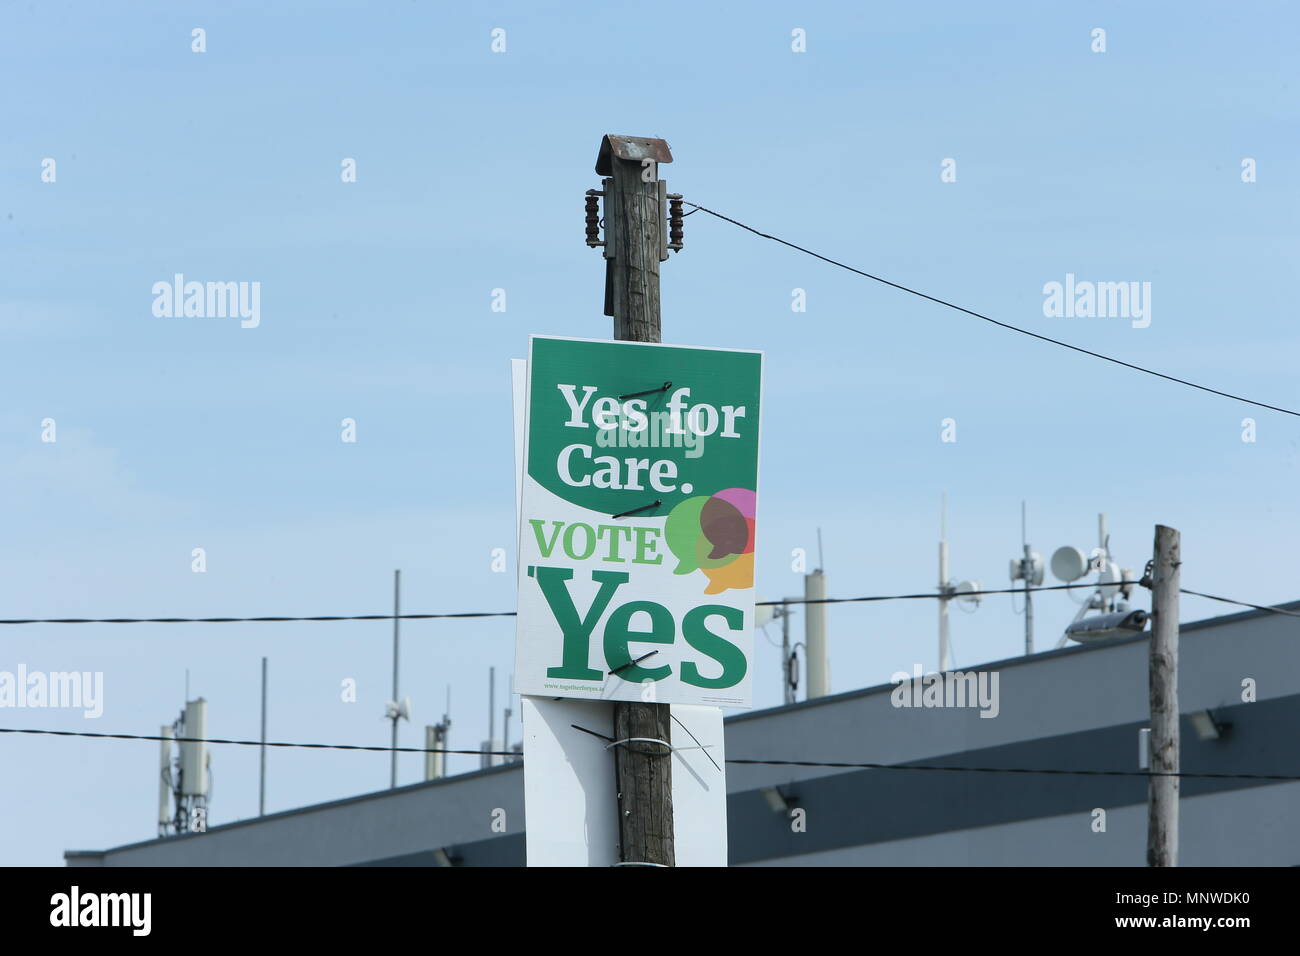 Image of a campaign poster for the Yes side in the Irish 8th Amendment Referendum. The Yes side campaigns to remove the 8th Amendment to the Irish Constitution which stipulates rights for the unborn as part of a move to liberalise the Republic of Ireland's abortion laws. Stock Photo